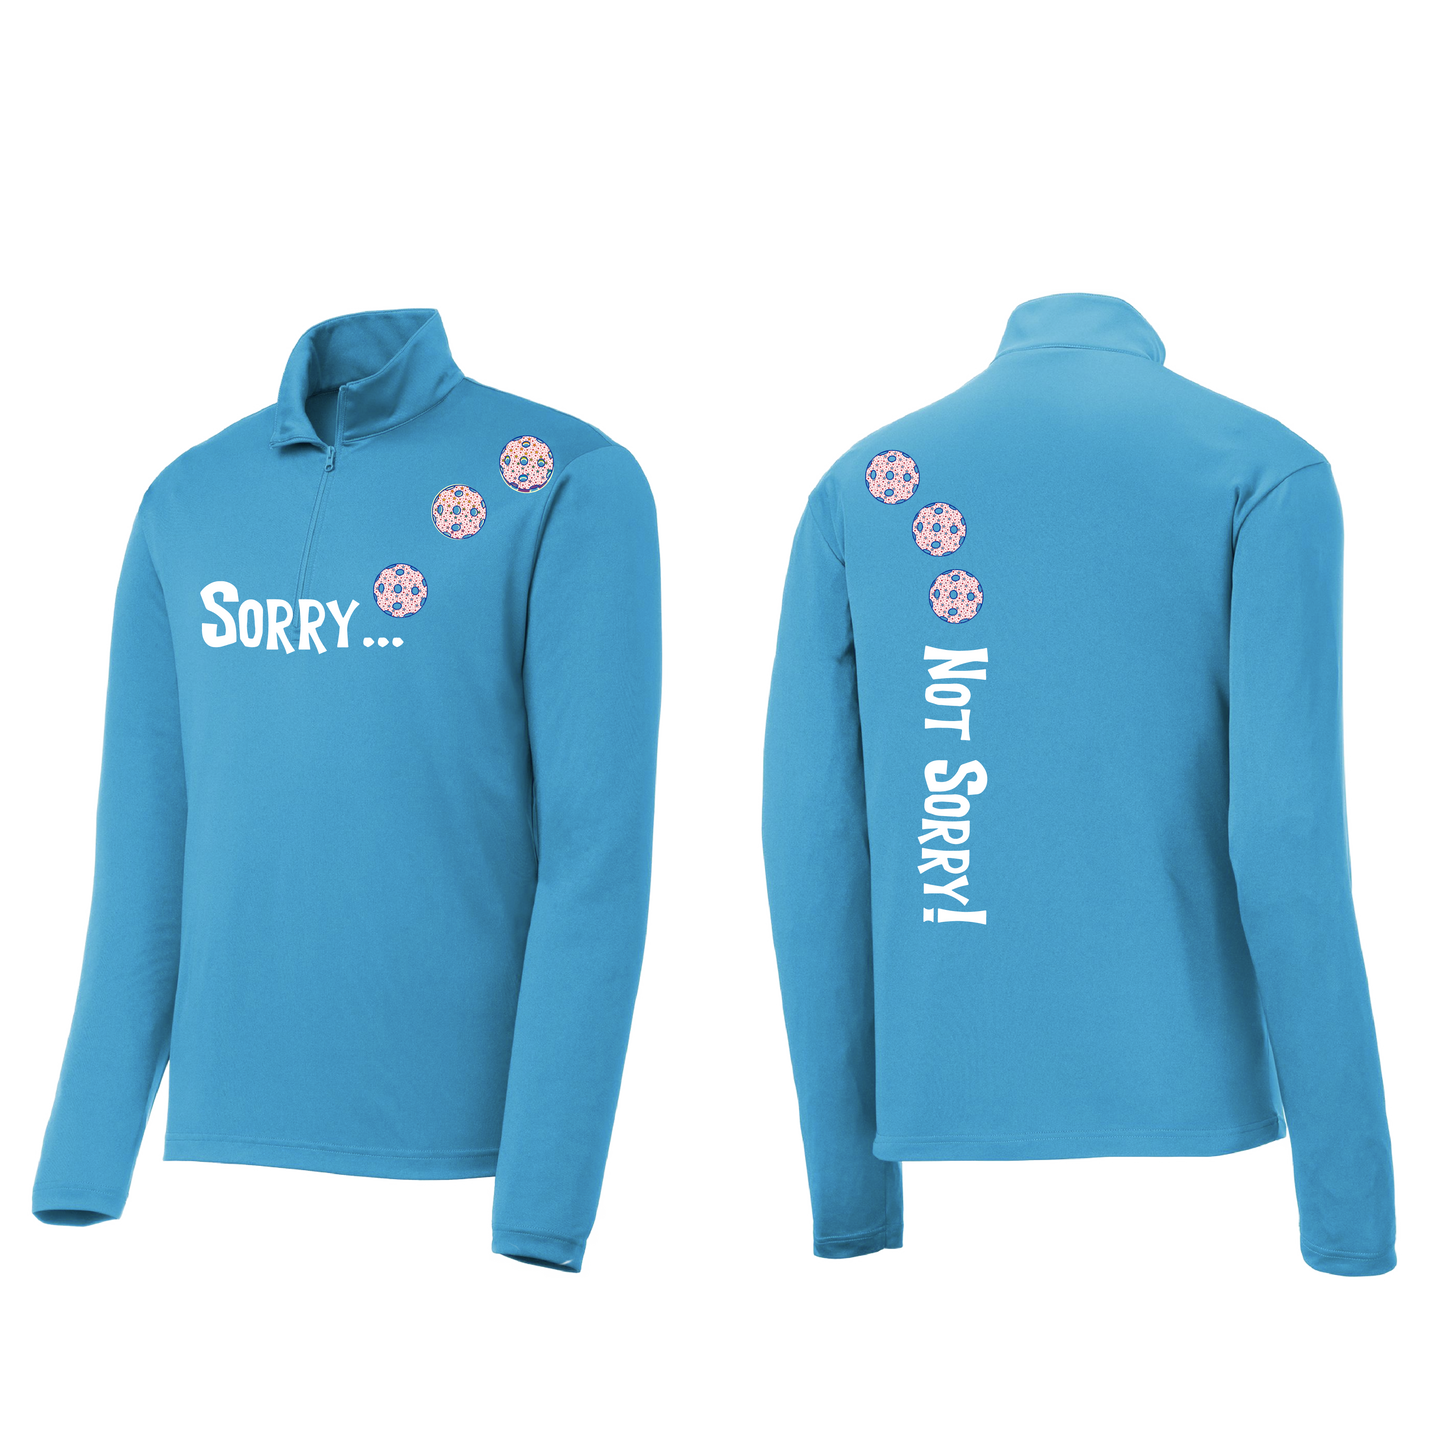 Sorry Not Sorry With Pickleballs (Cyan Orange Purple Stars) | Men's 1/4 Zip Long Sleeve Pullover Athletic Shirt | 100% Polyester